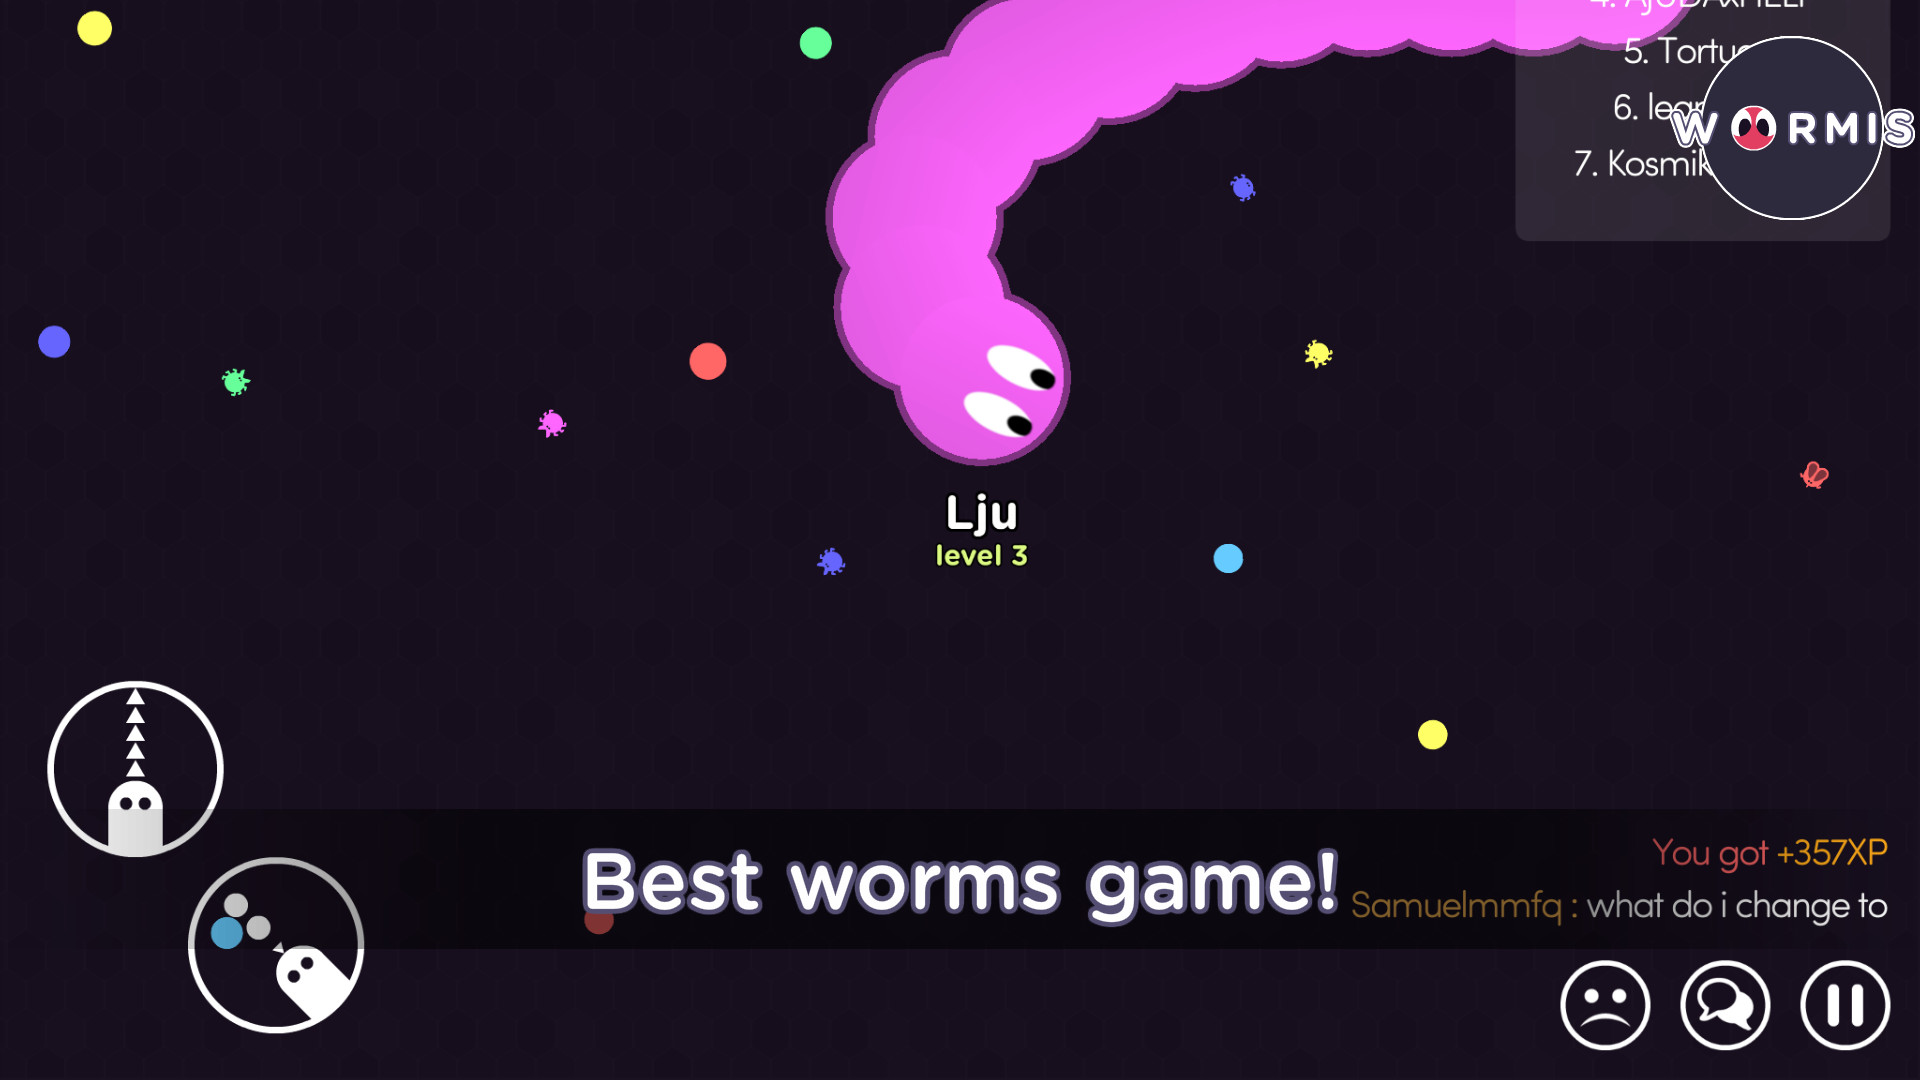 Worm.is: The Game - Win/Mac - (Steam)